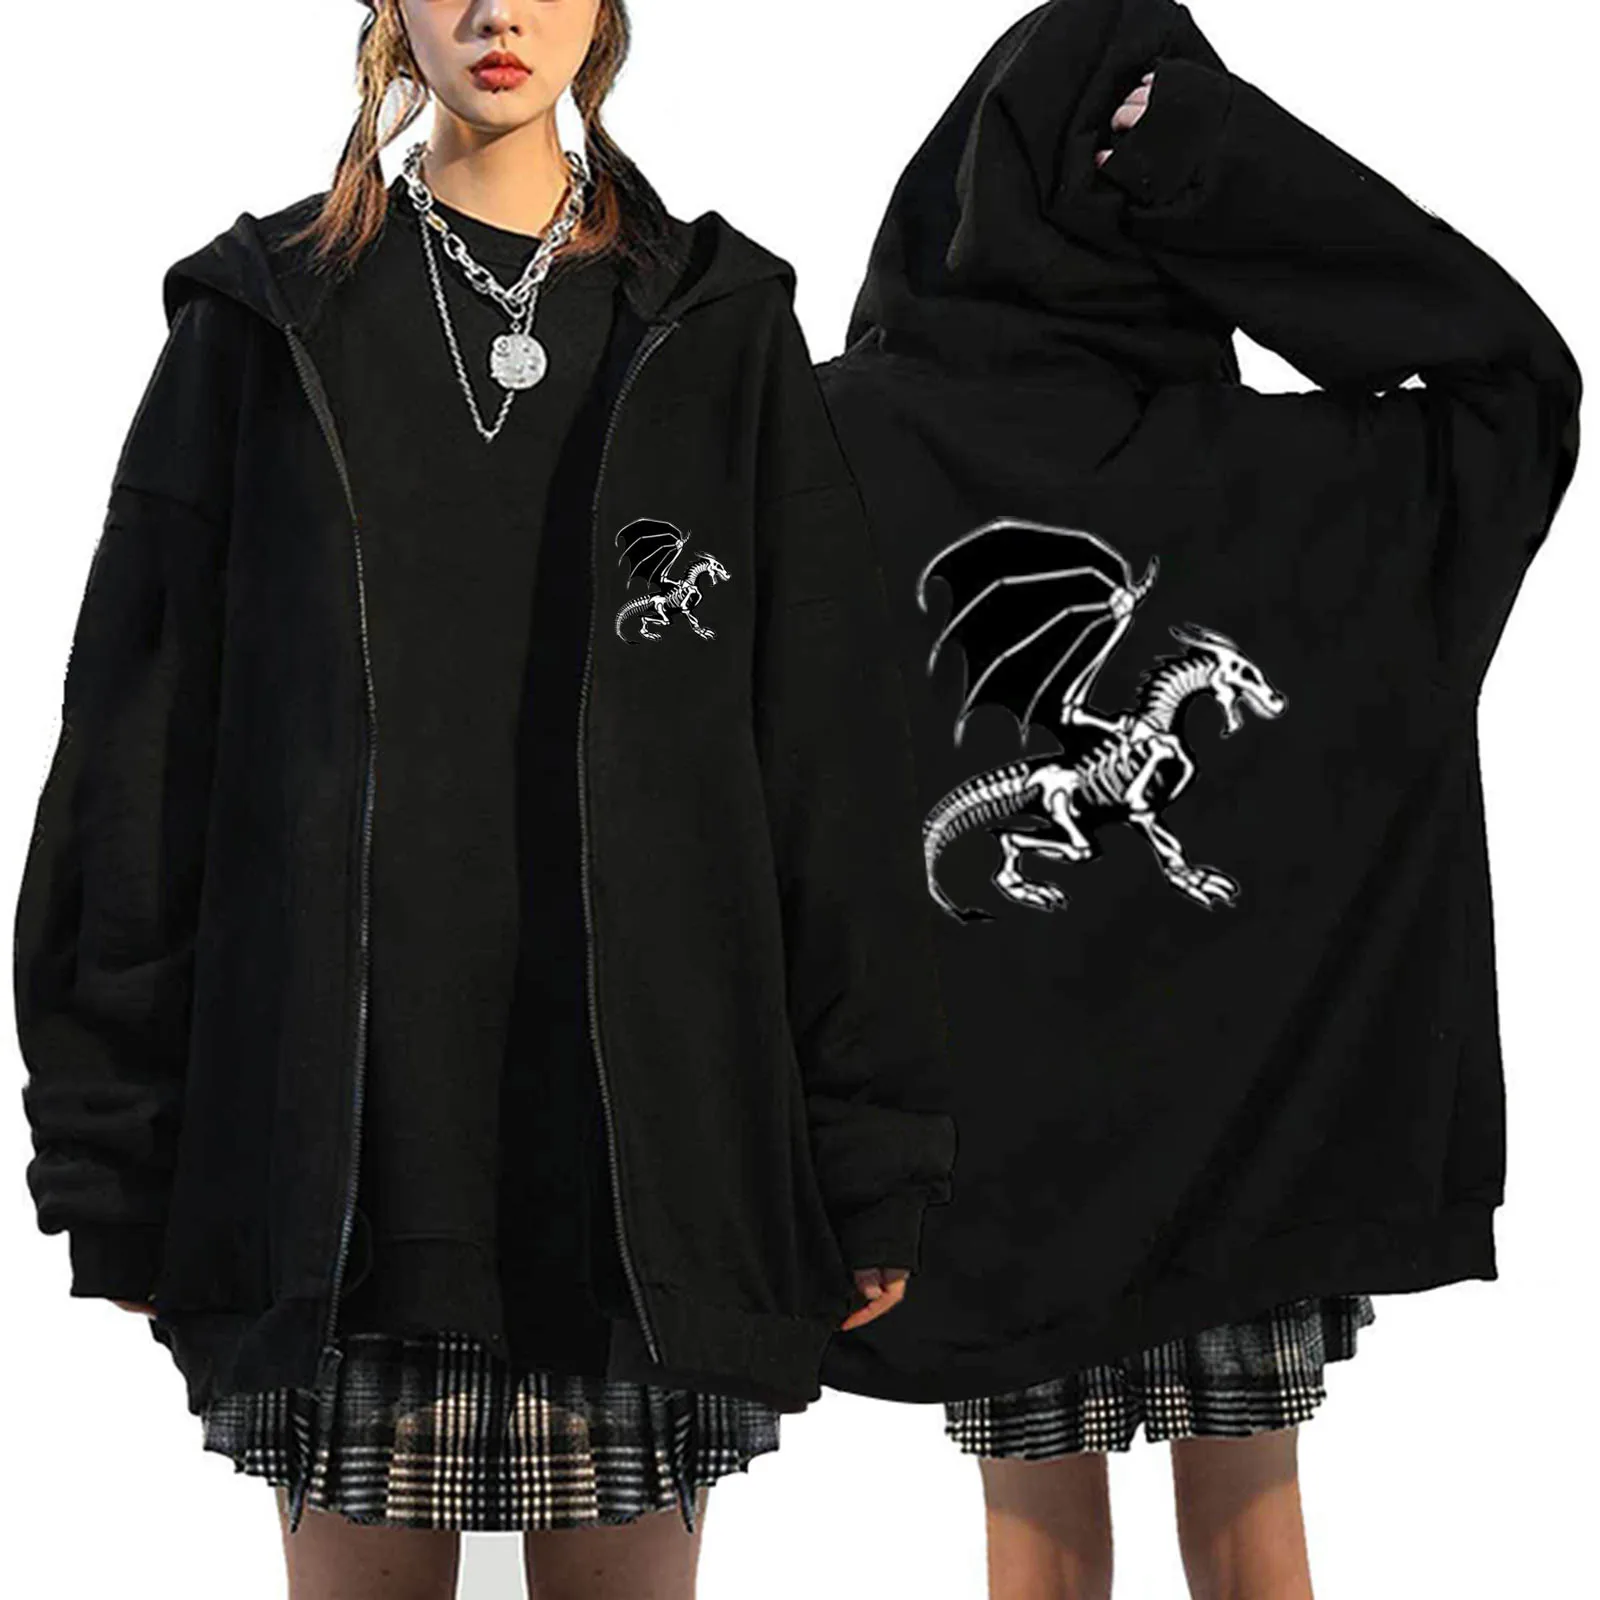 

Print Hoodies Womens Long Sleeve Top Gothic Zip Up Hoodie Lace Sweatshirt With Pockets y2k clothes sudaderas con capucha